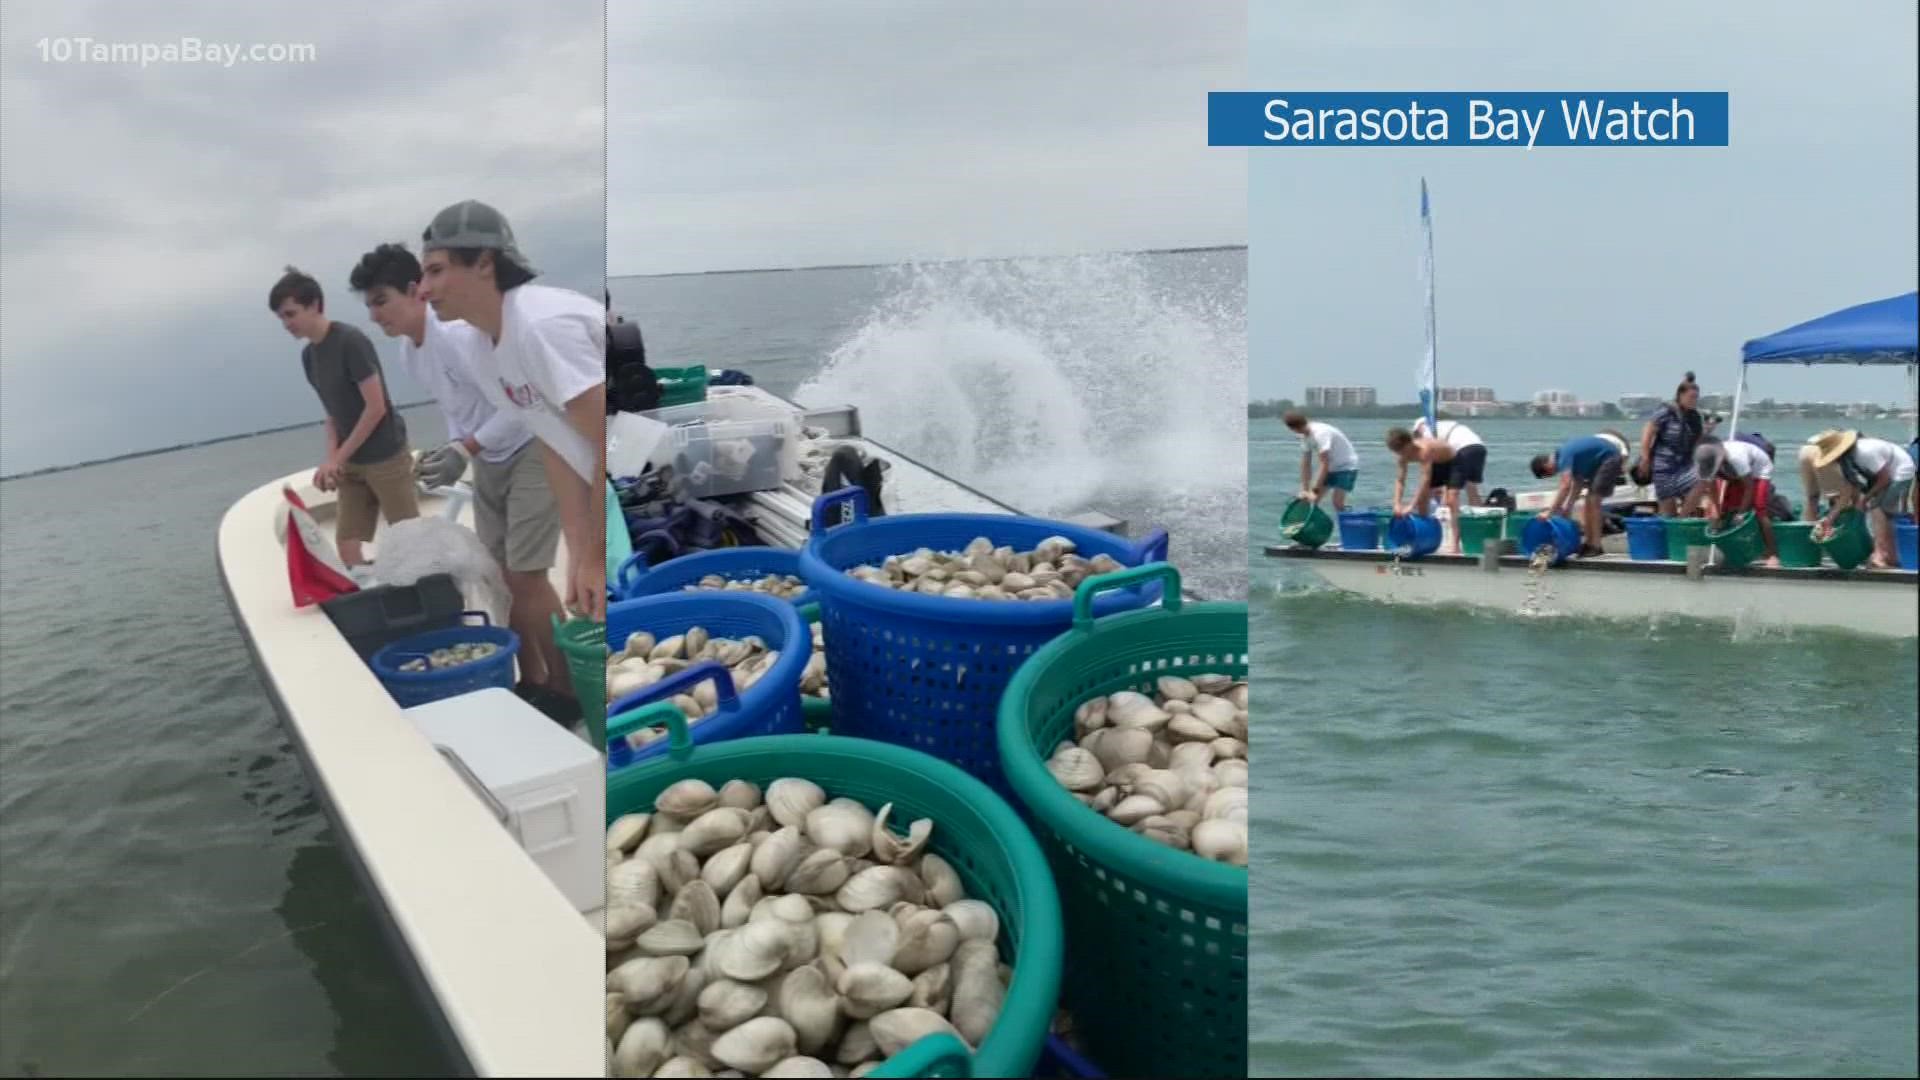 The group hopes to release 1 million clams into the bay by July.